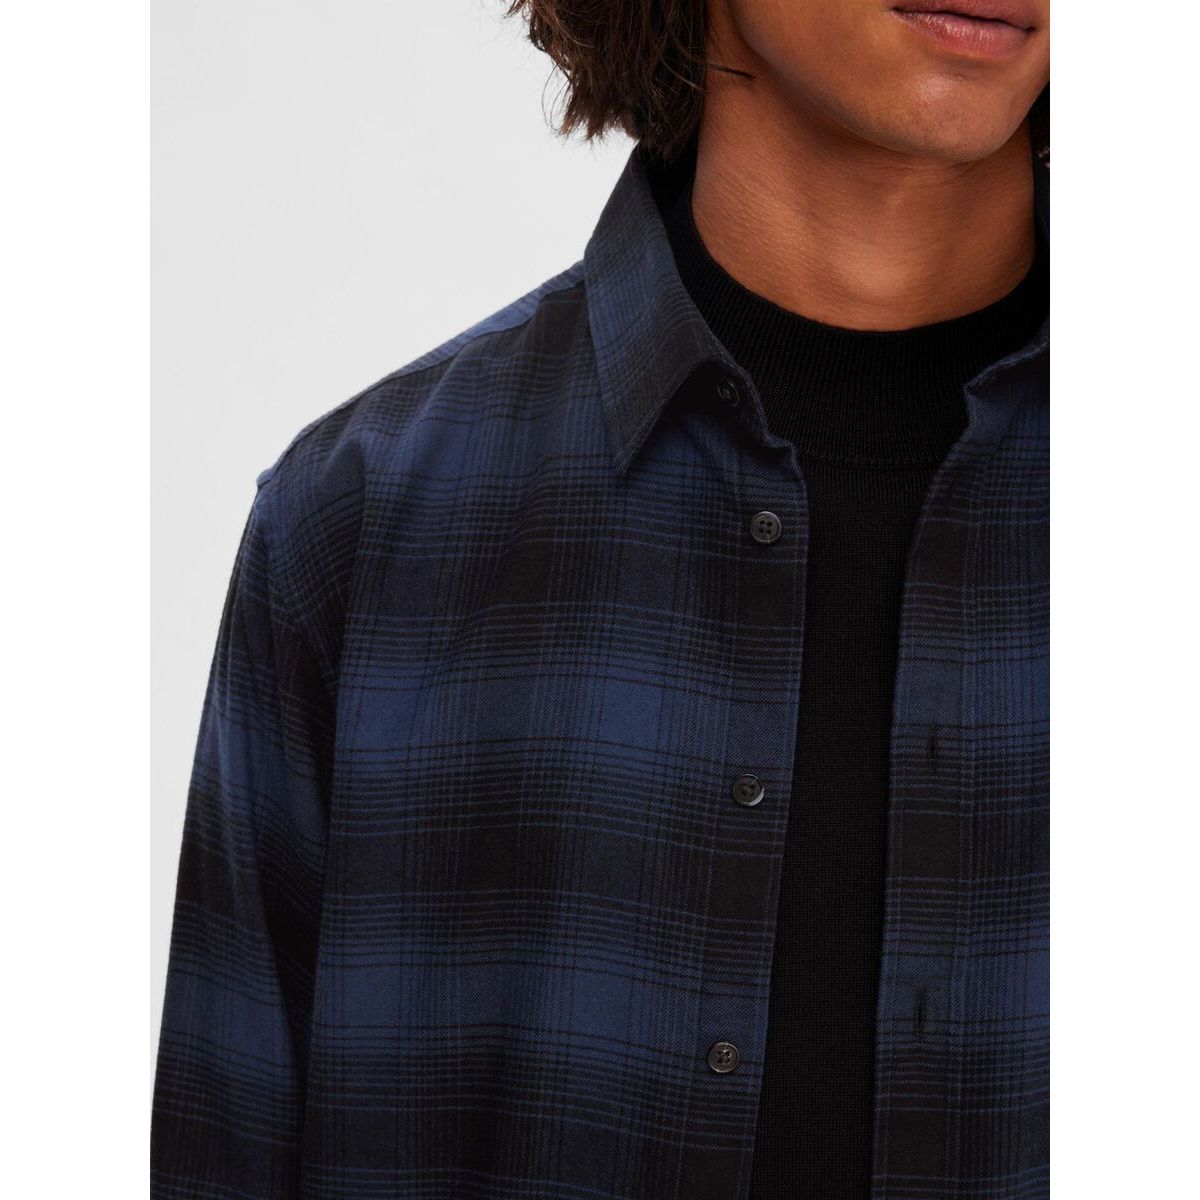 Selected Homme - Flannel Shirt - Sky Captain/ Faded